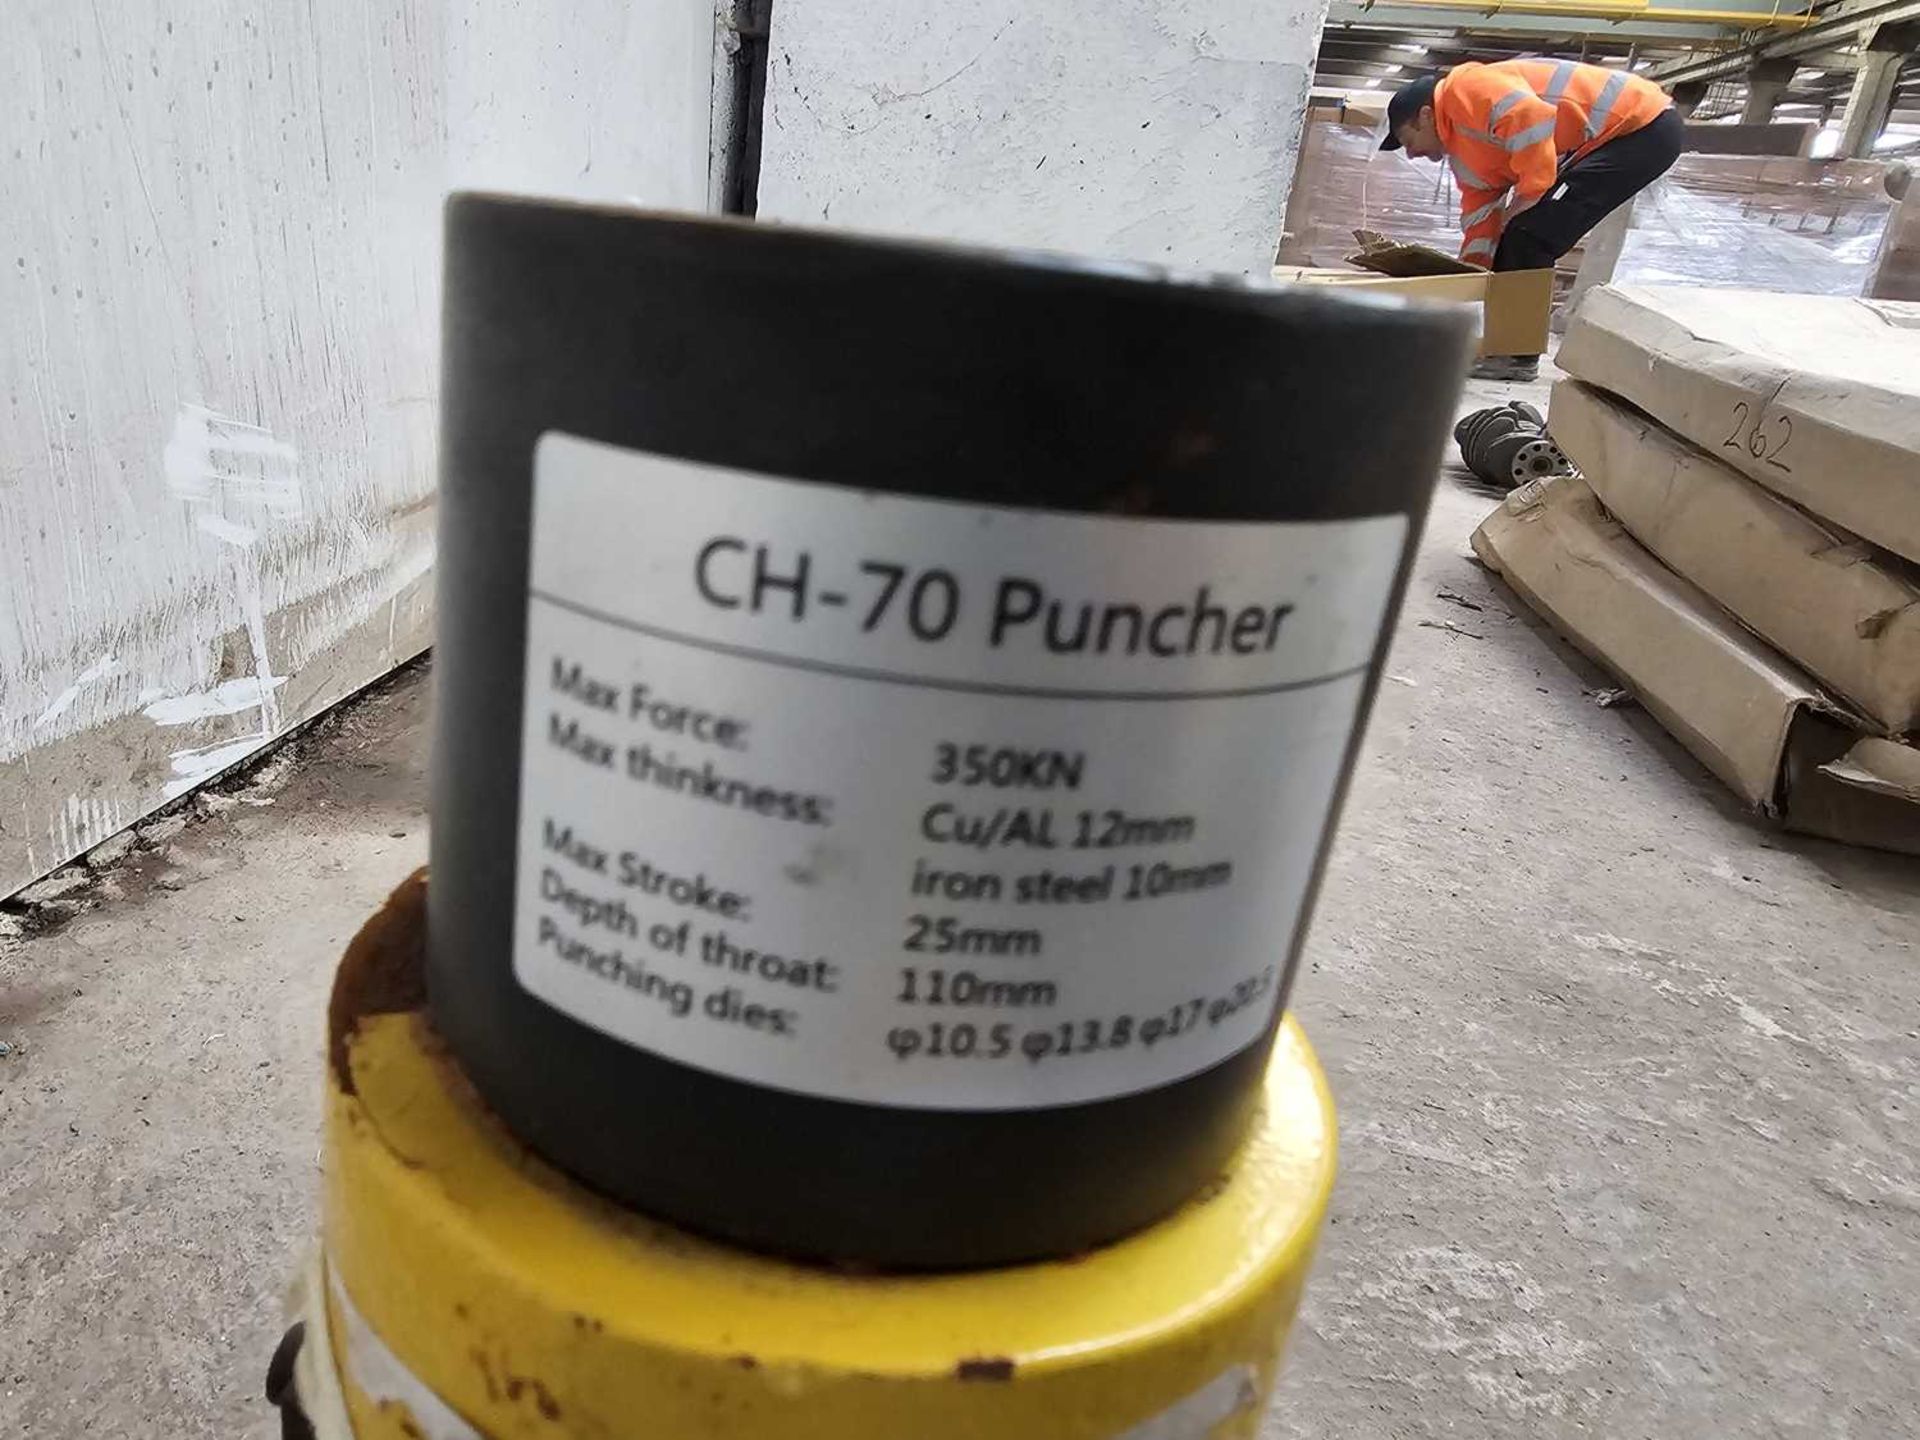 CH-70 350KN Hydraulic Puncher - Image 4 of 4